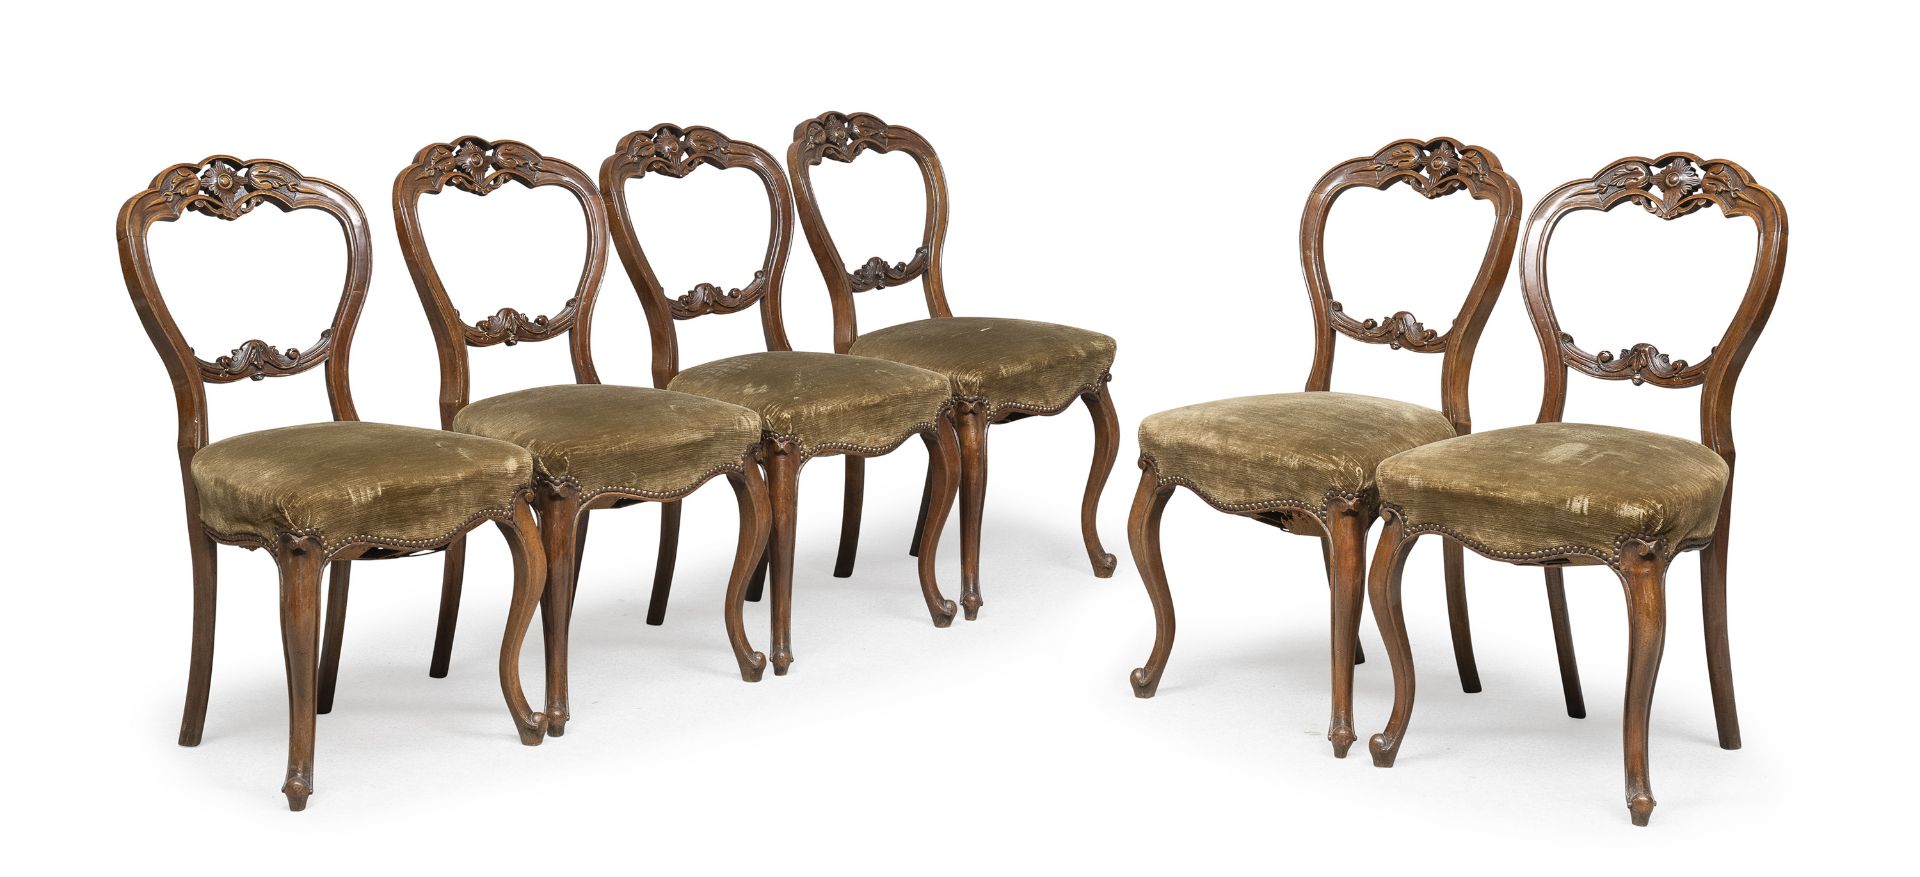 SIX WALNUT CHAIRS CENTRAL ITALY 19TH CENTURY